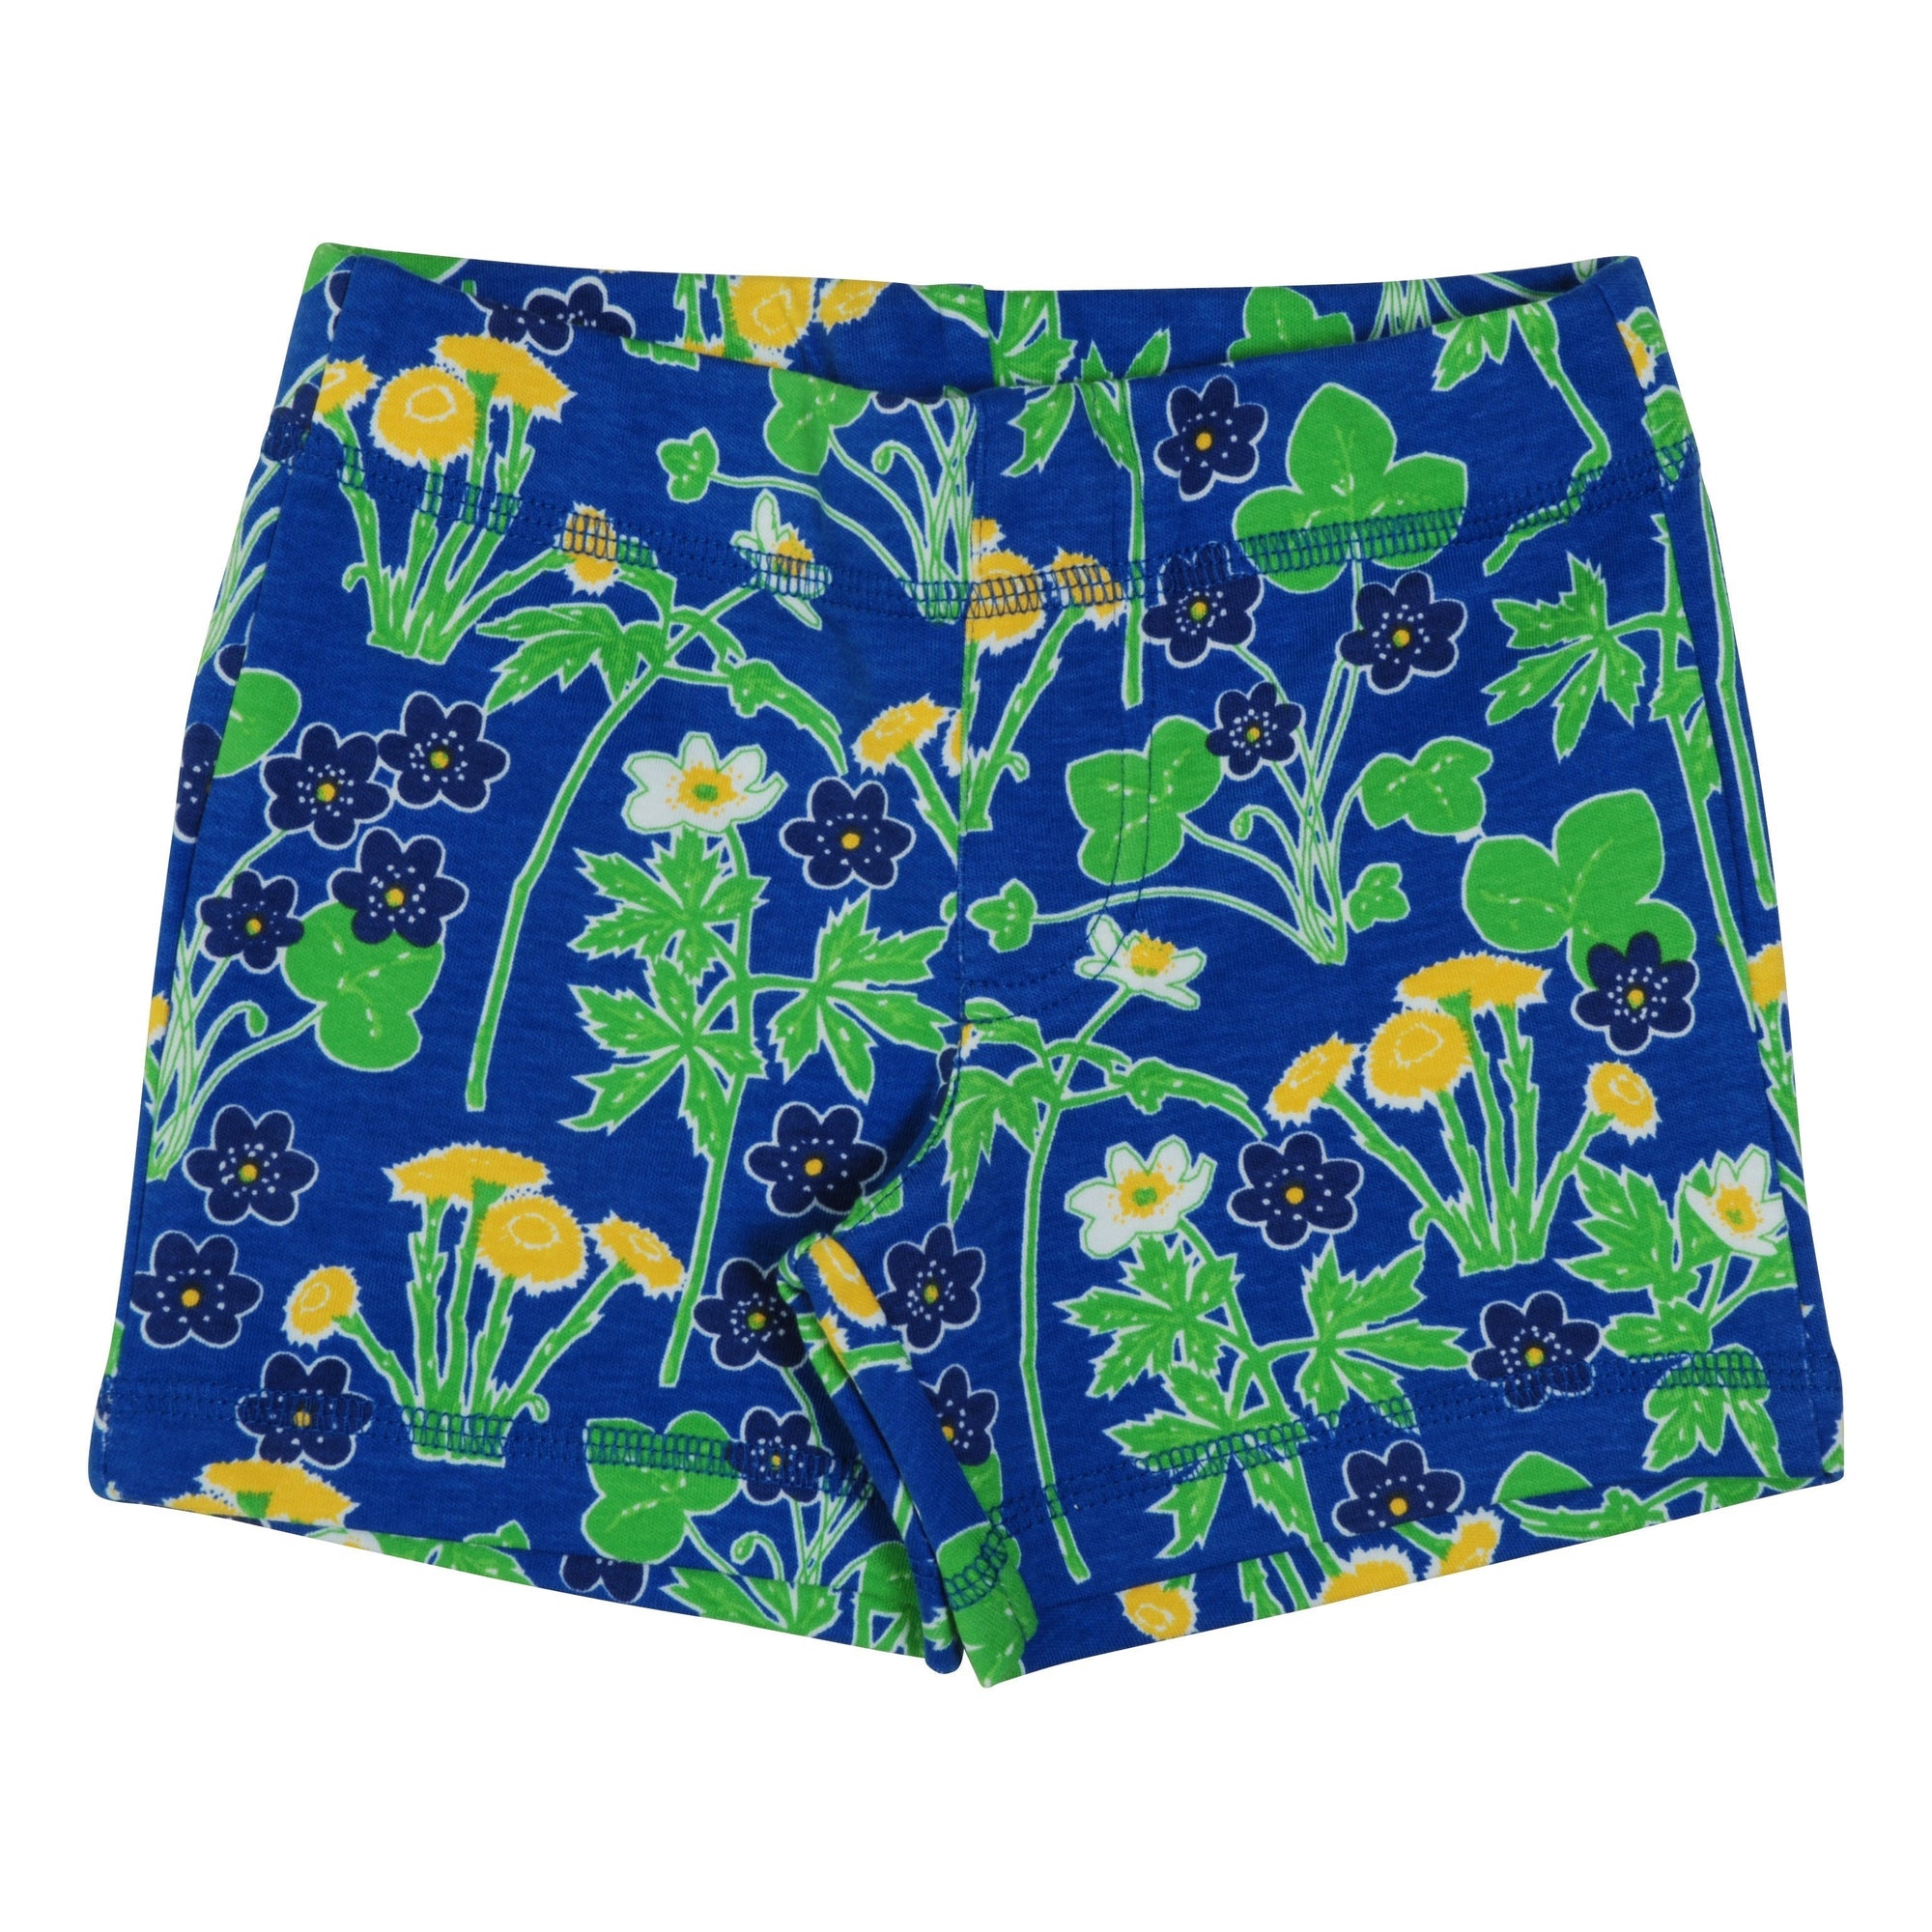 Coltsfoot - Blue Shorts - 1 Left Size 10-12 years-Duns Sweden-Modern Rascals